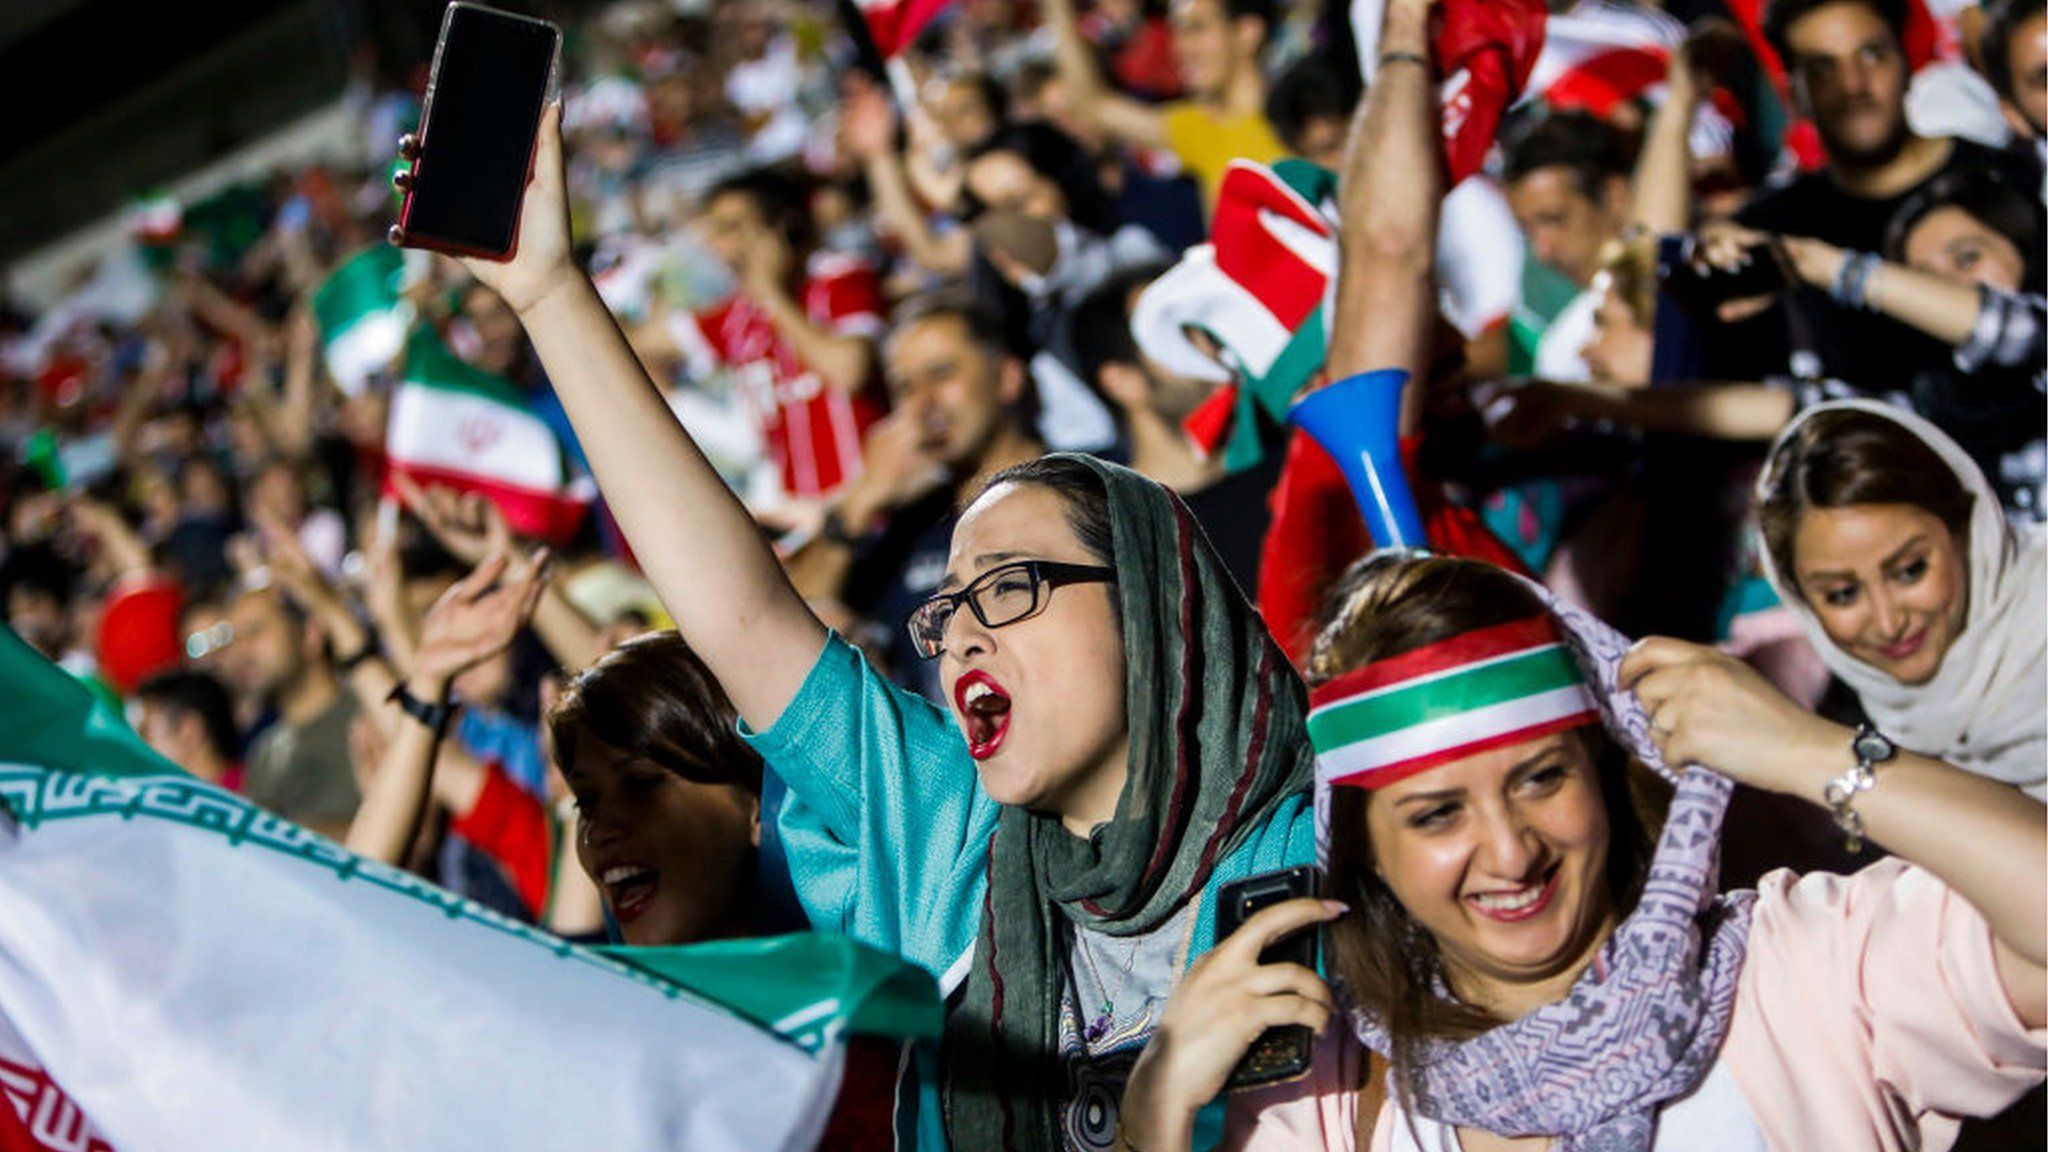 Iranian football supporters during screening of football match between Iran and Spain in Azadi stadium in the capital Tehran on June 20, 2018